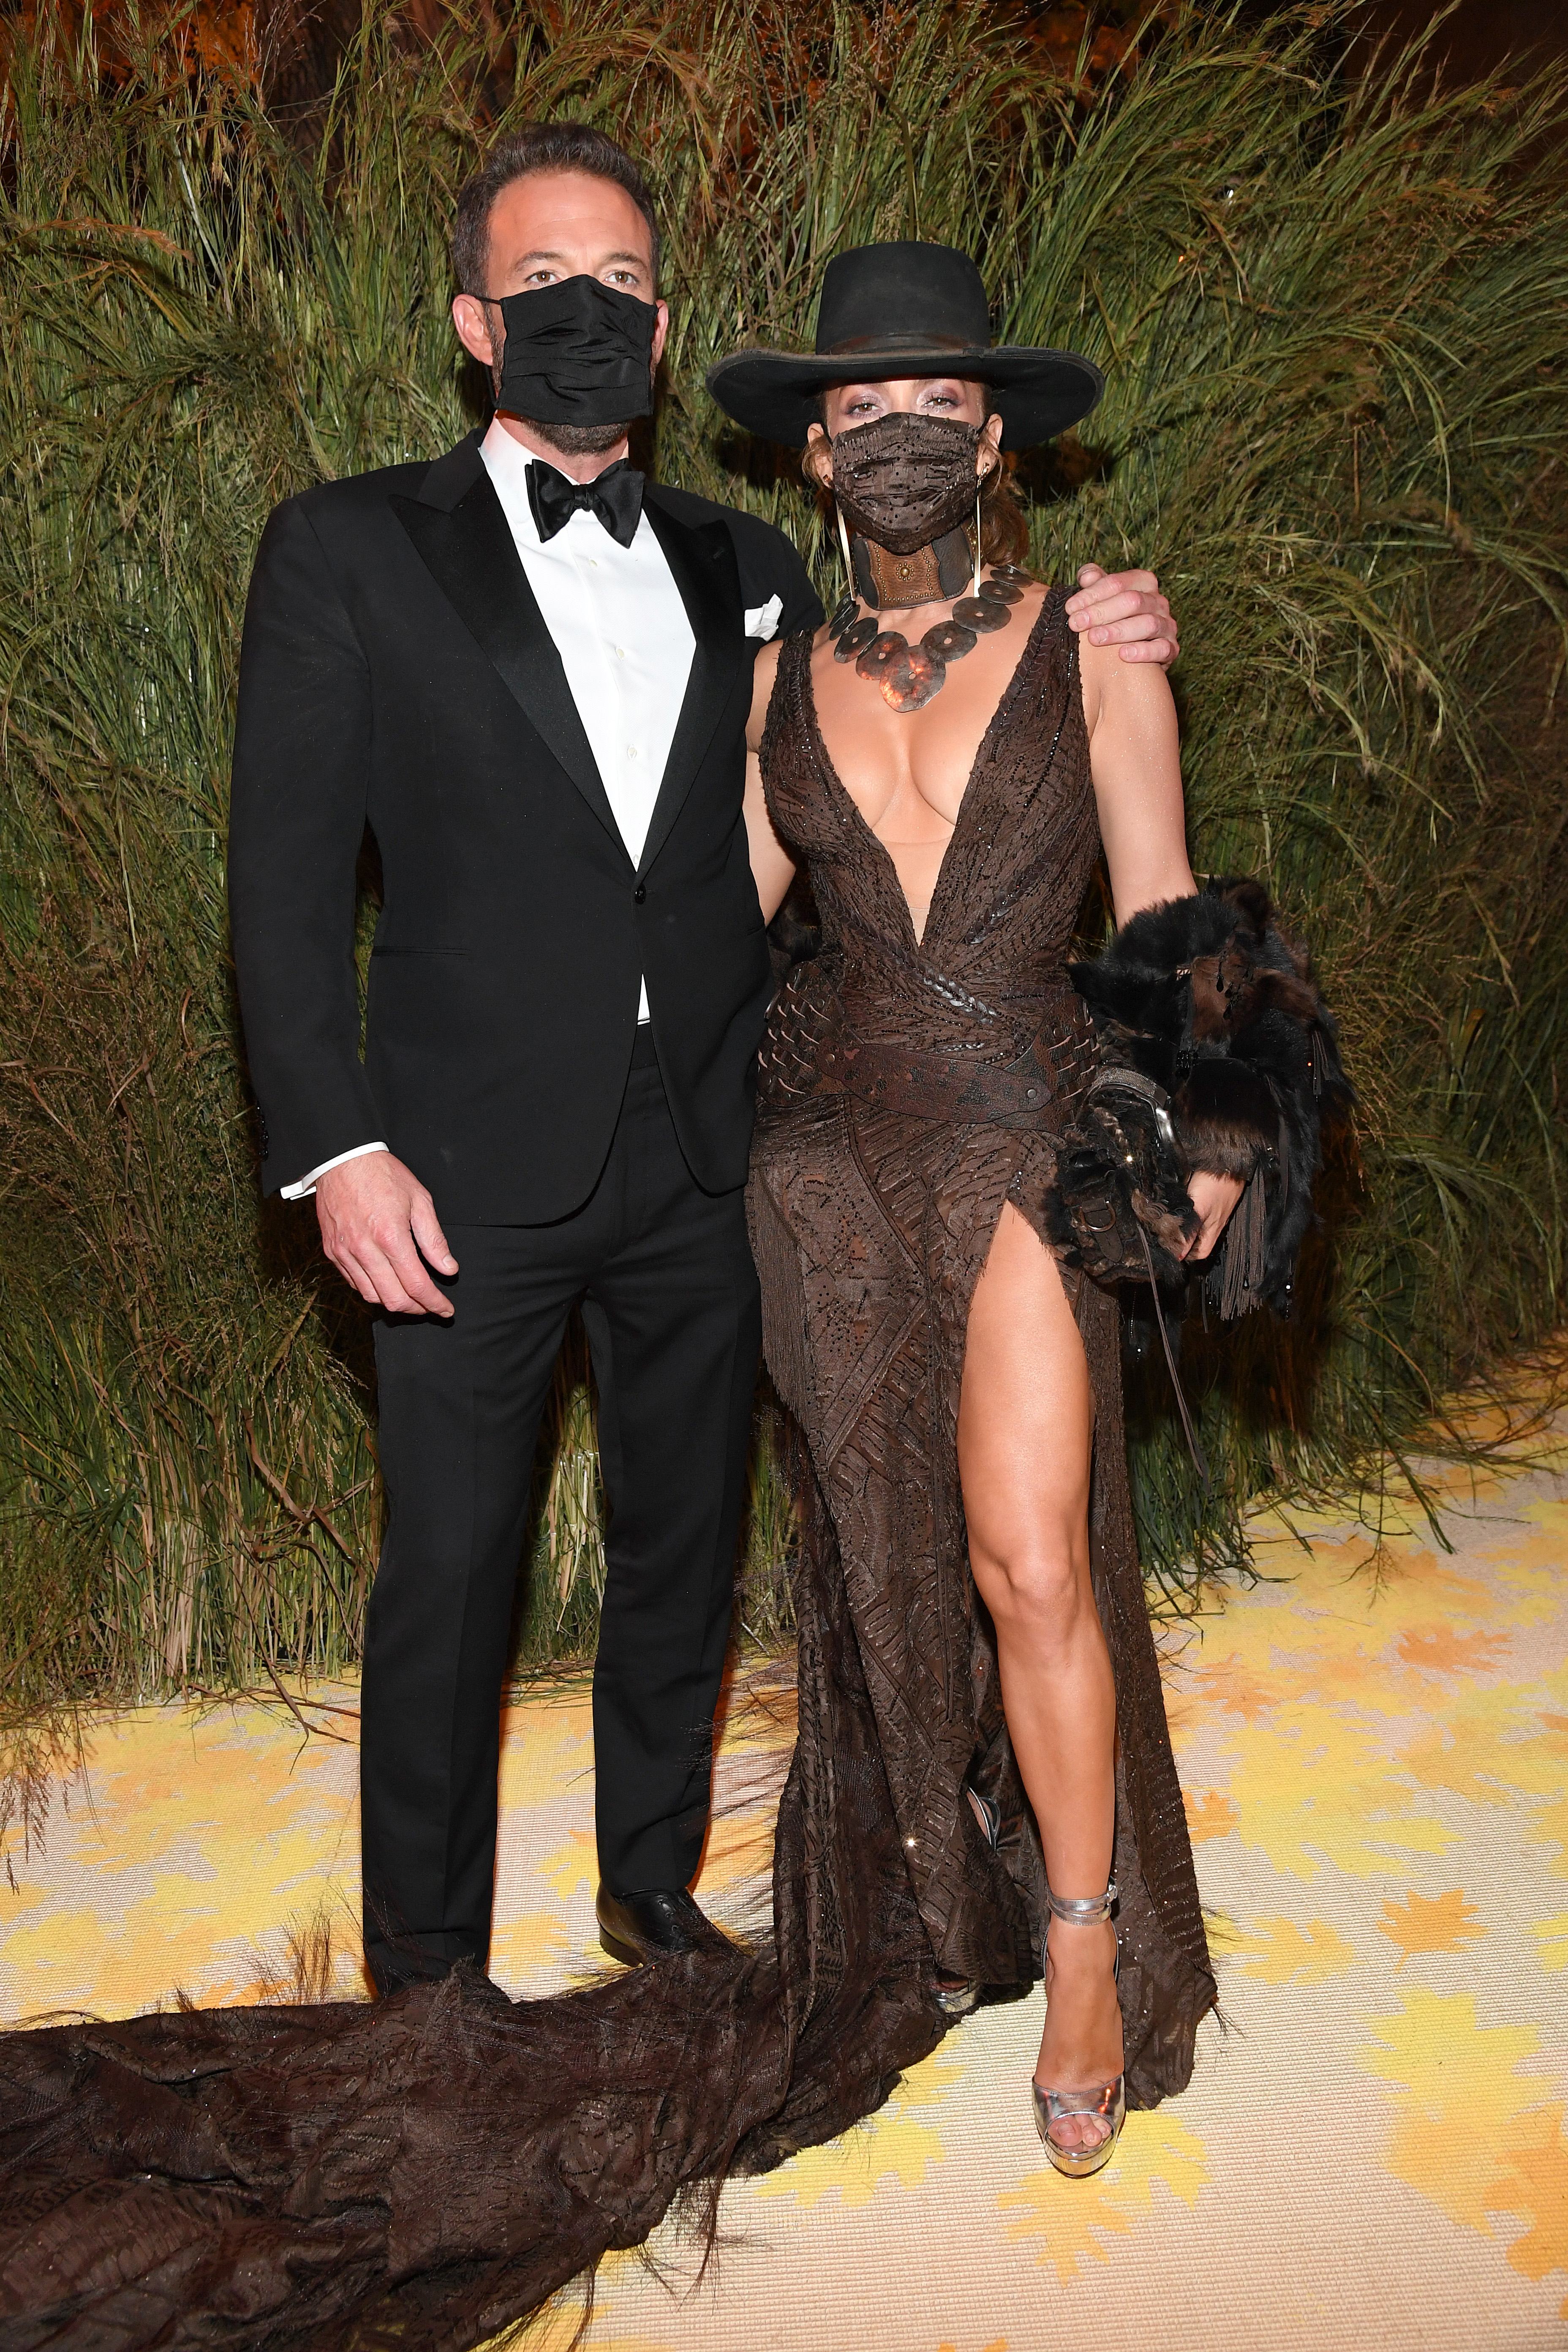 Ben Affleck und Jennifer Lopez bei der Met Gala 2021 "Celebrating In America: A Lexicon of Fashion" in New York City am 13. September 2021 | Quelle: Getty Images